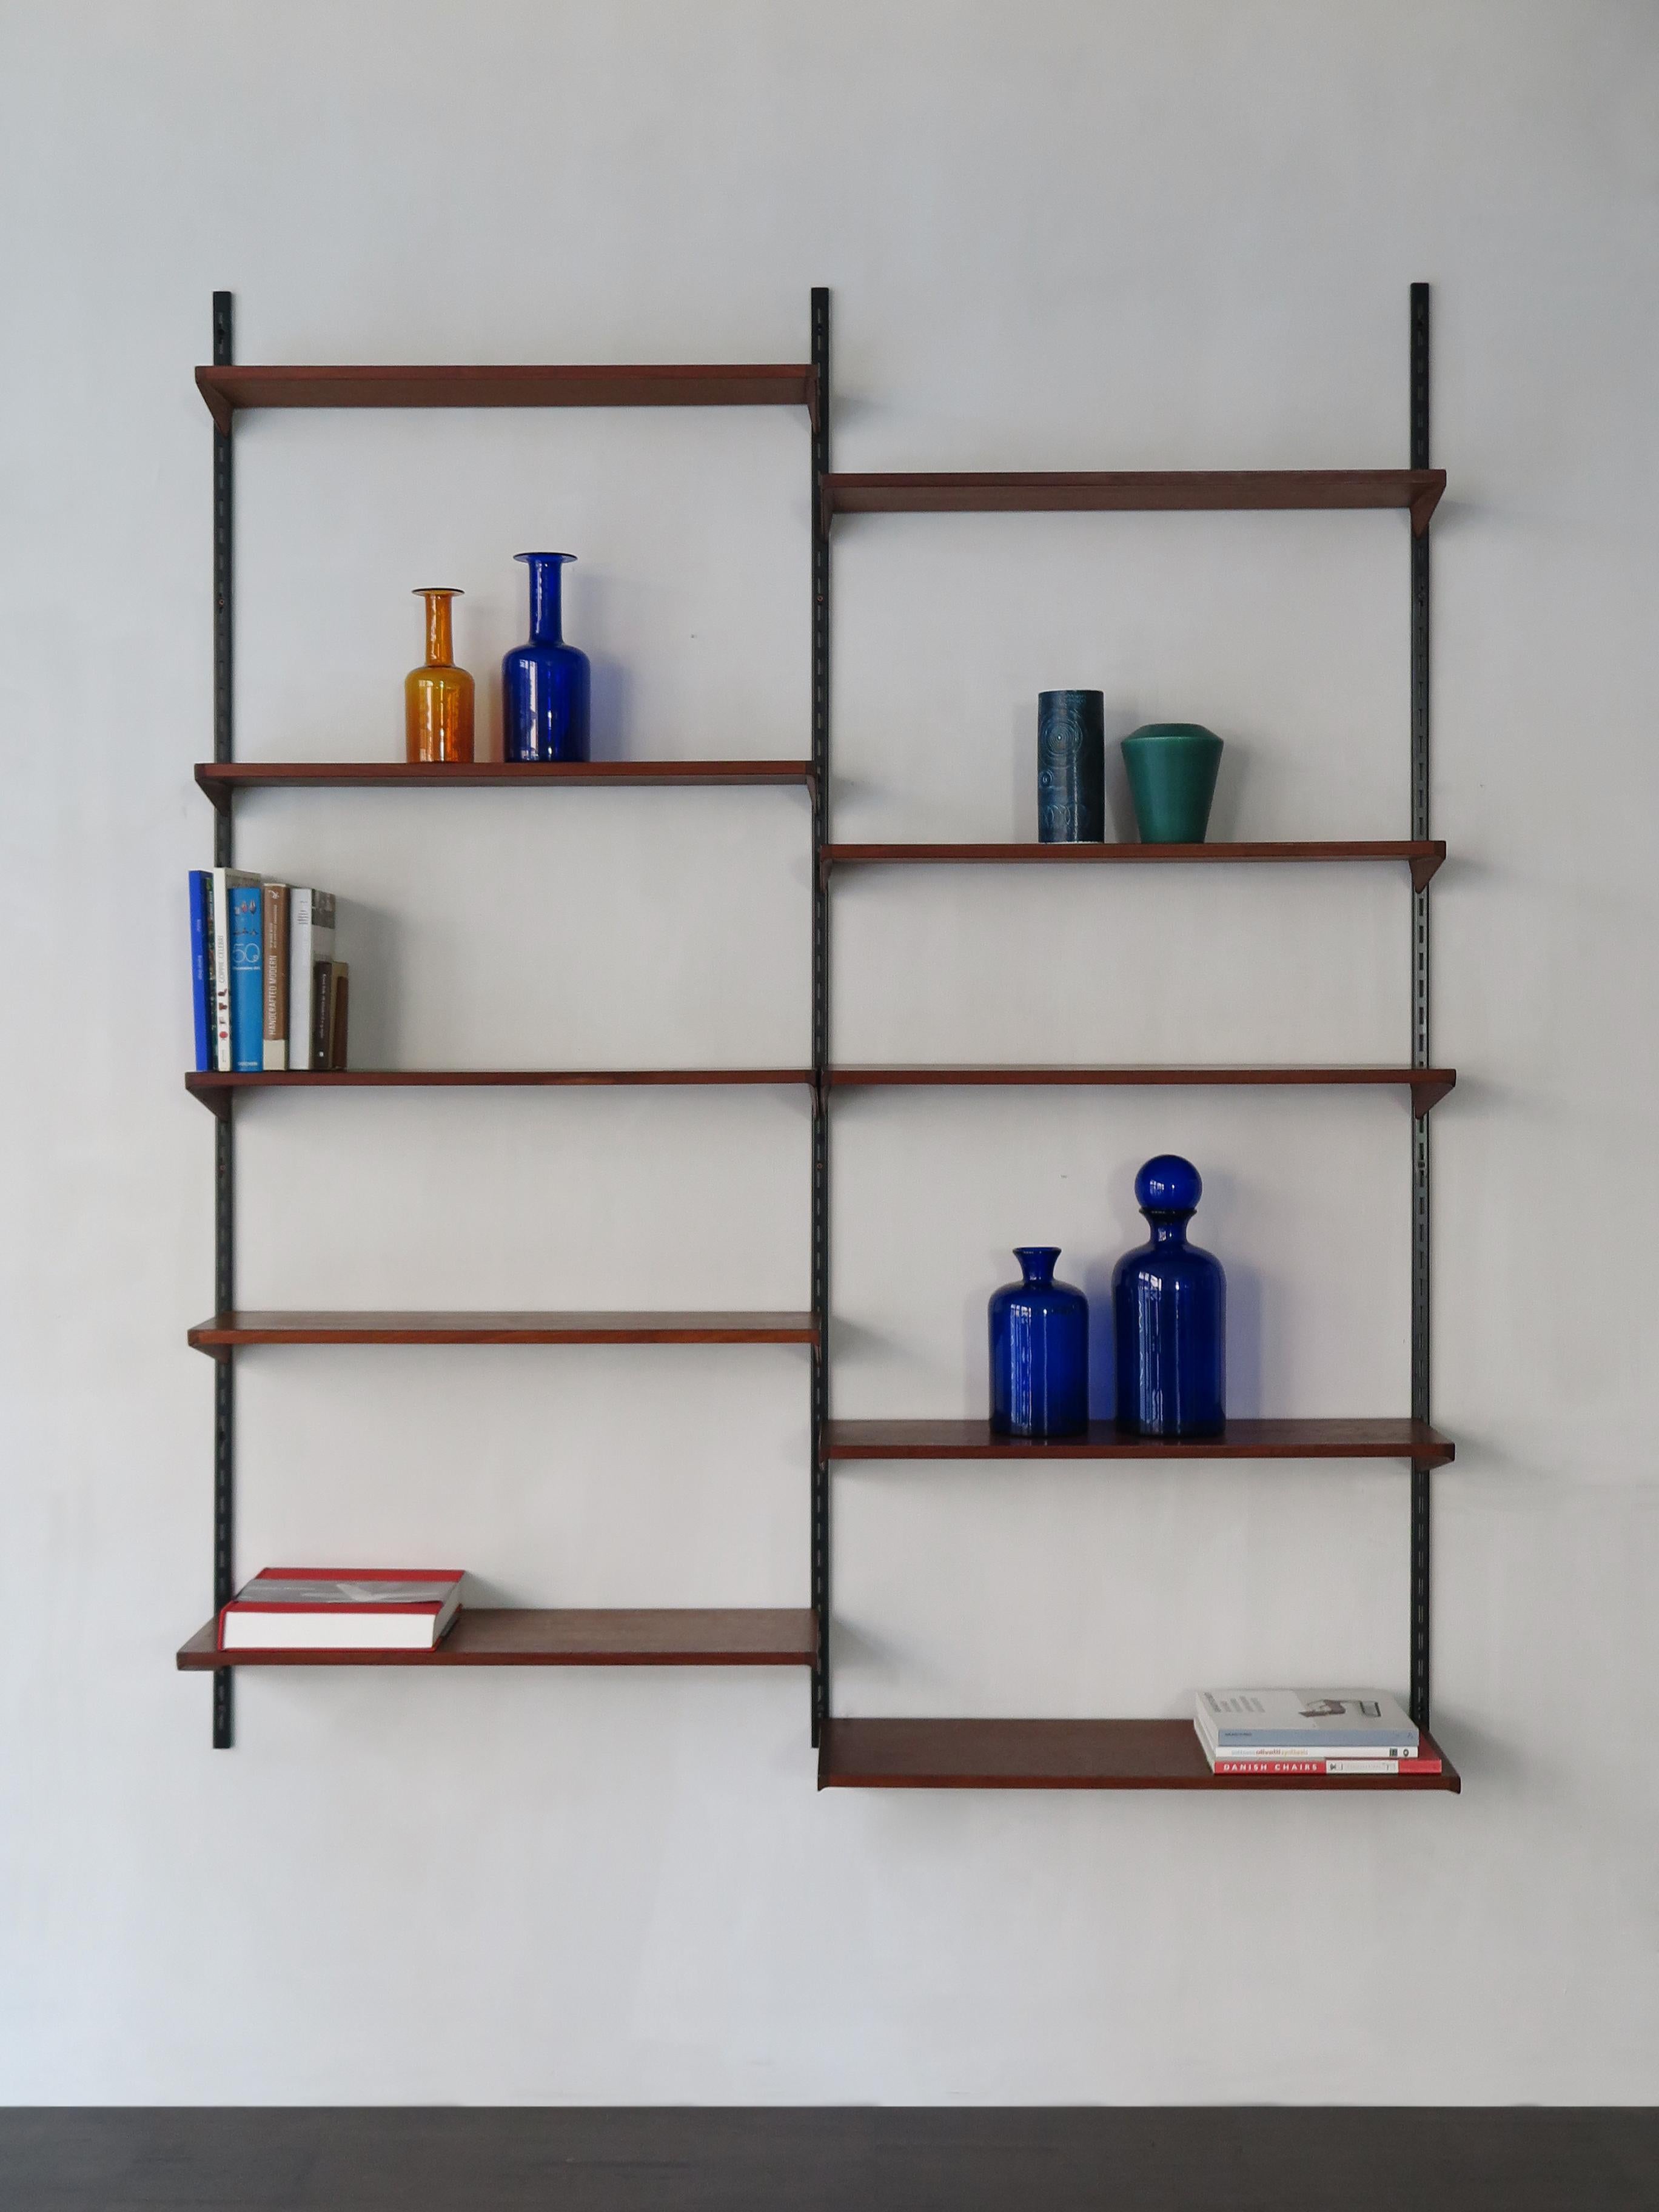 Scandinavian Mid-Century Modern design teak shelving system designed by Kai Kristiansen for FM Mobler Denmark, shelves can be positioned as desired, circa 1960.

Original rails with teak (see picture)

Please note that the item is original of